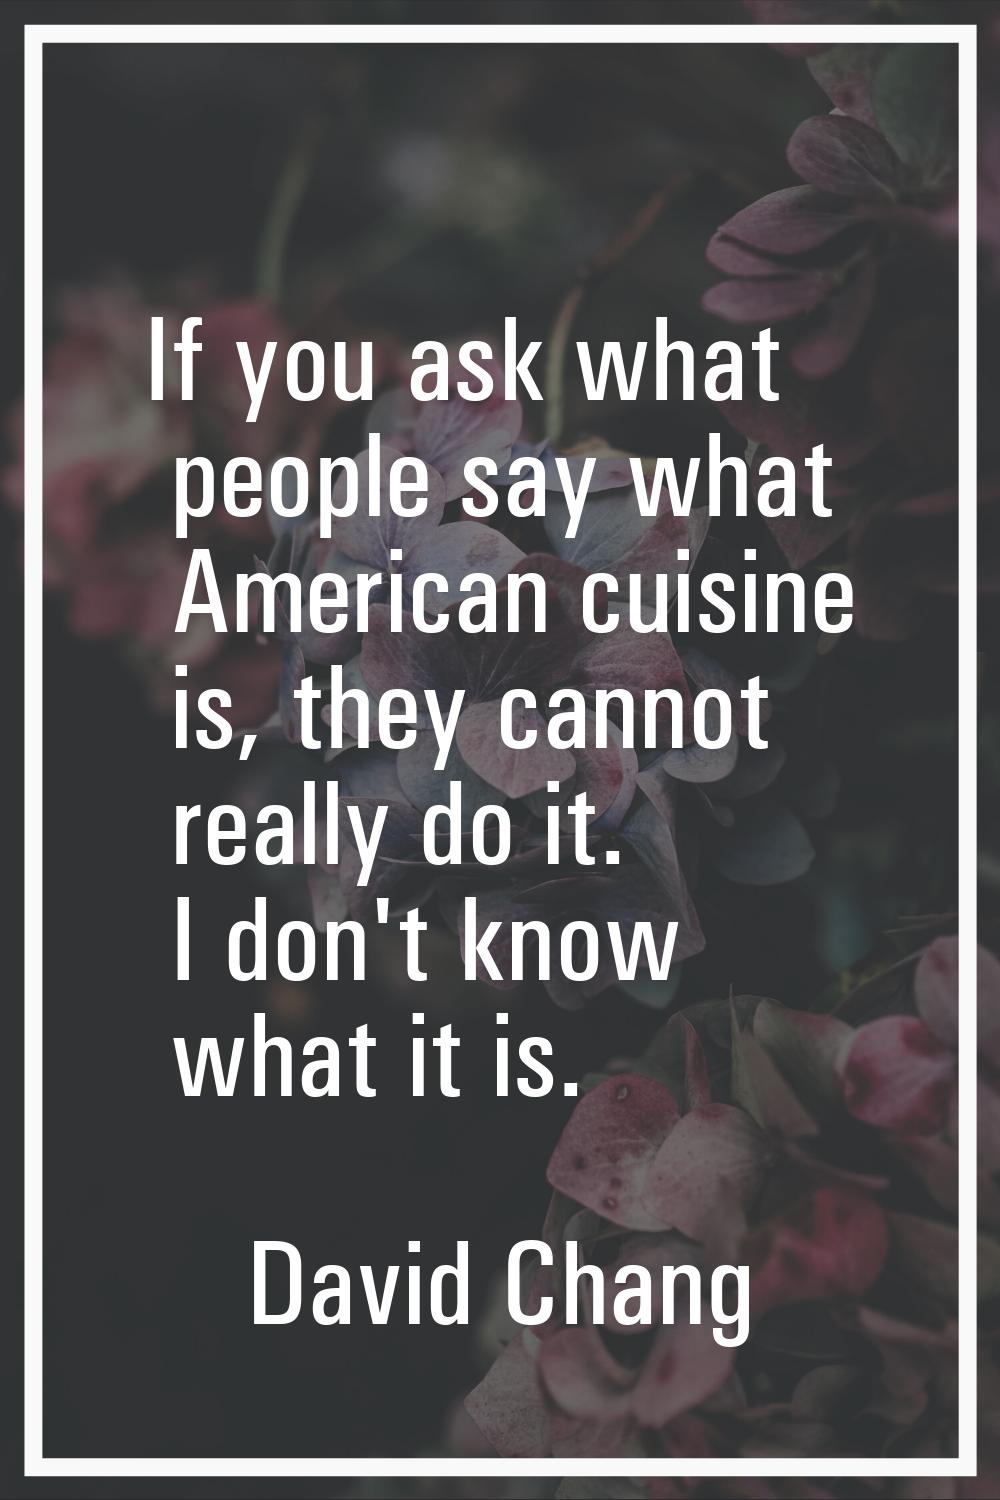 If you ask what people say what American cuisine is, they cannot really do it. I don't know what it